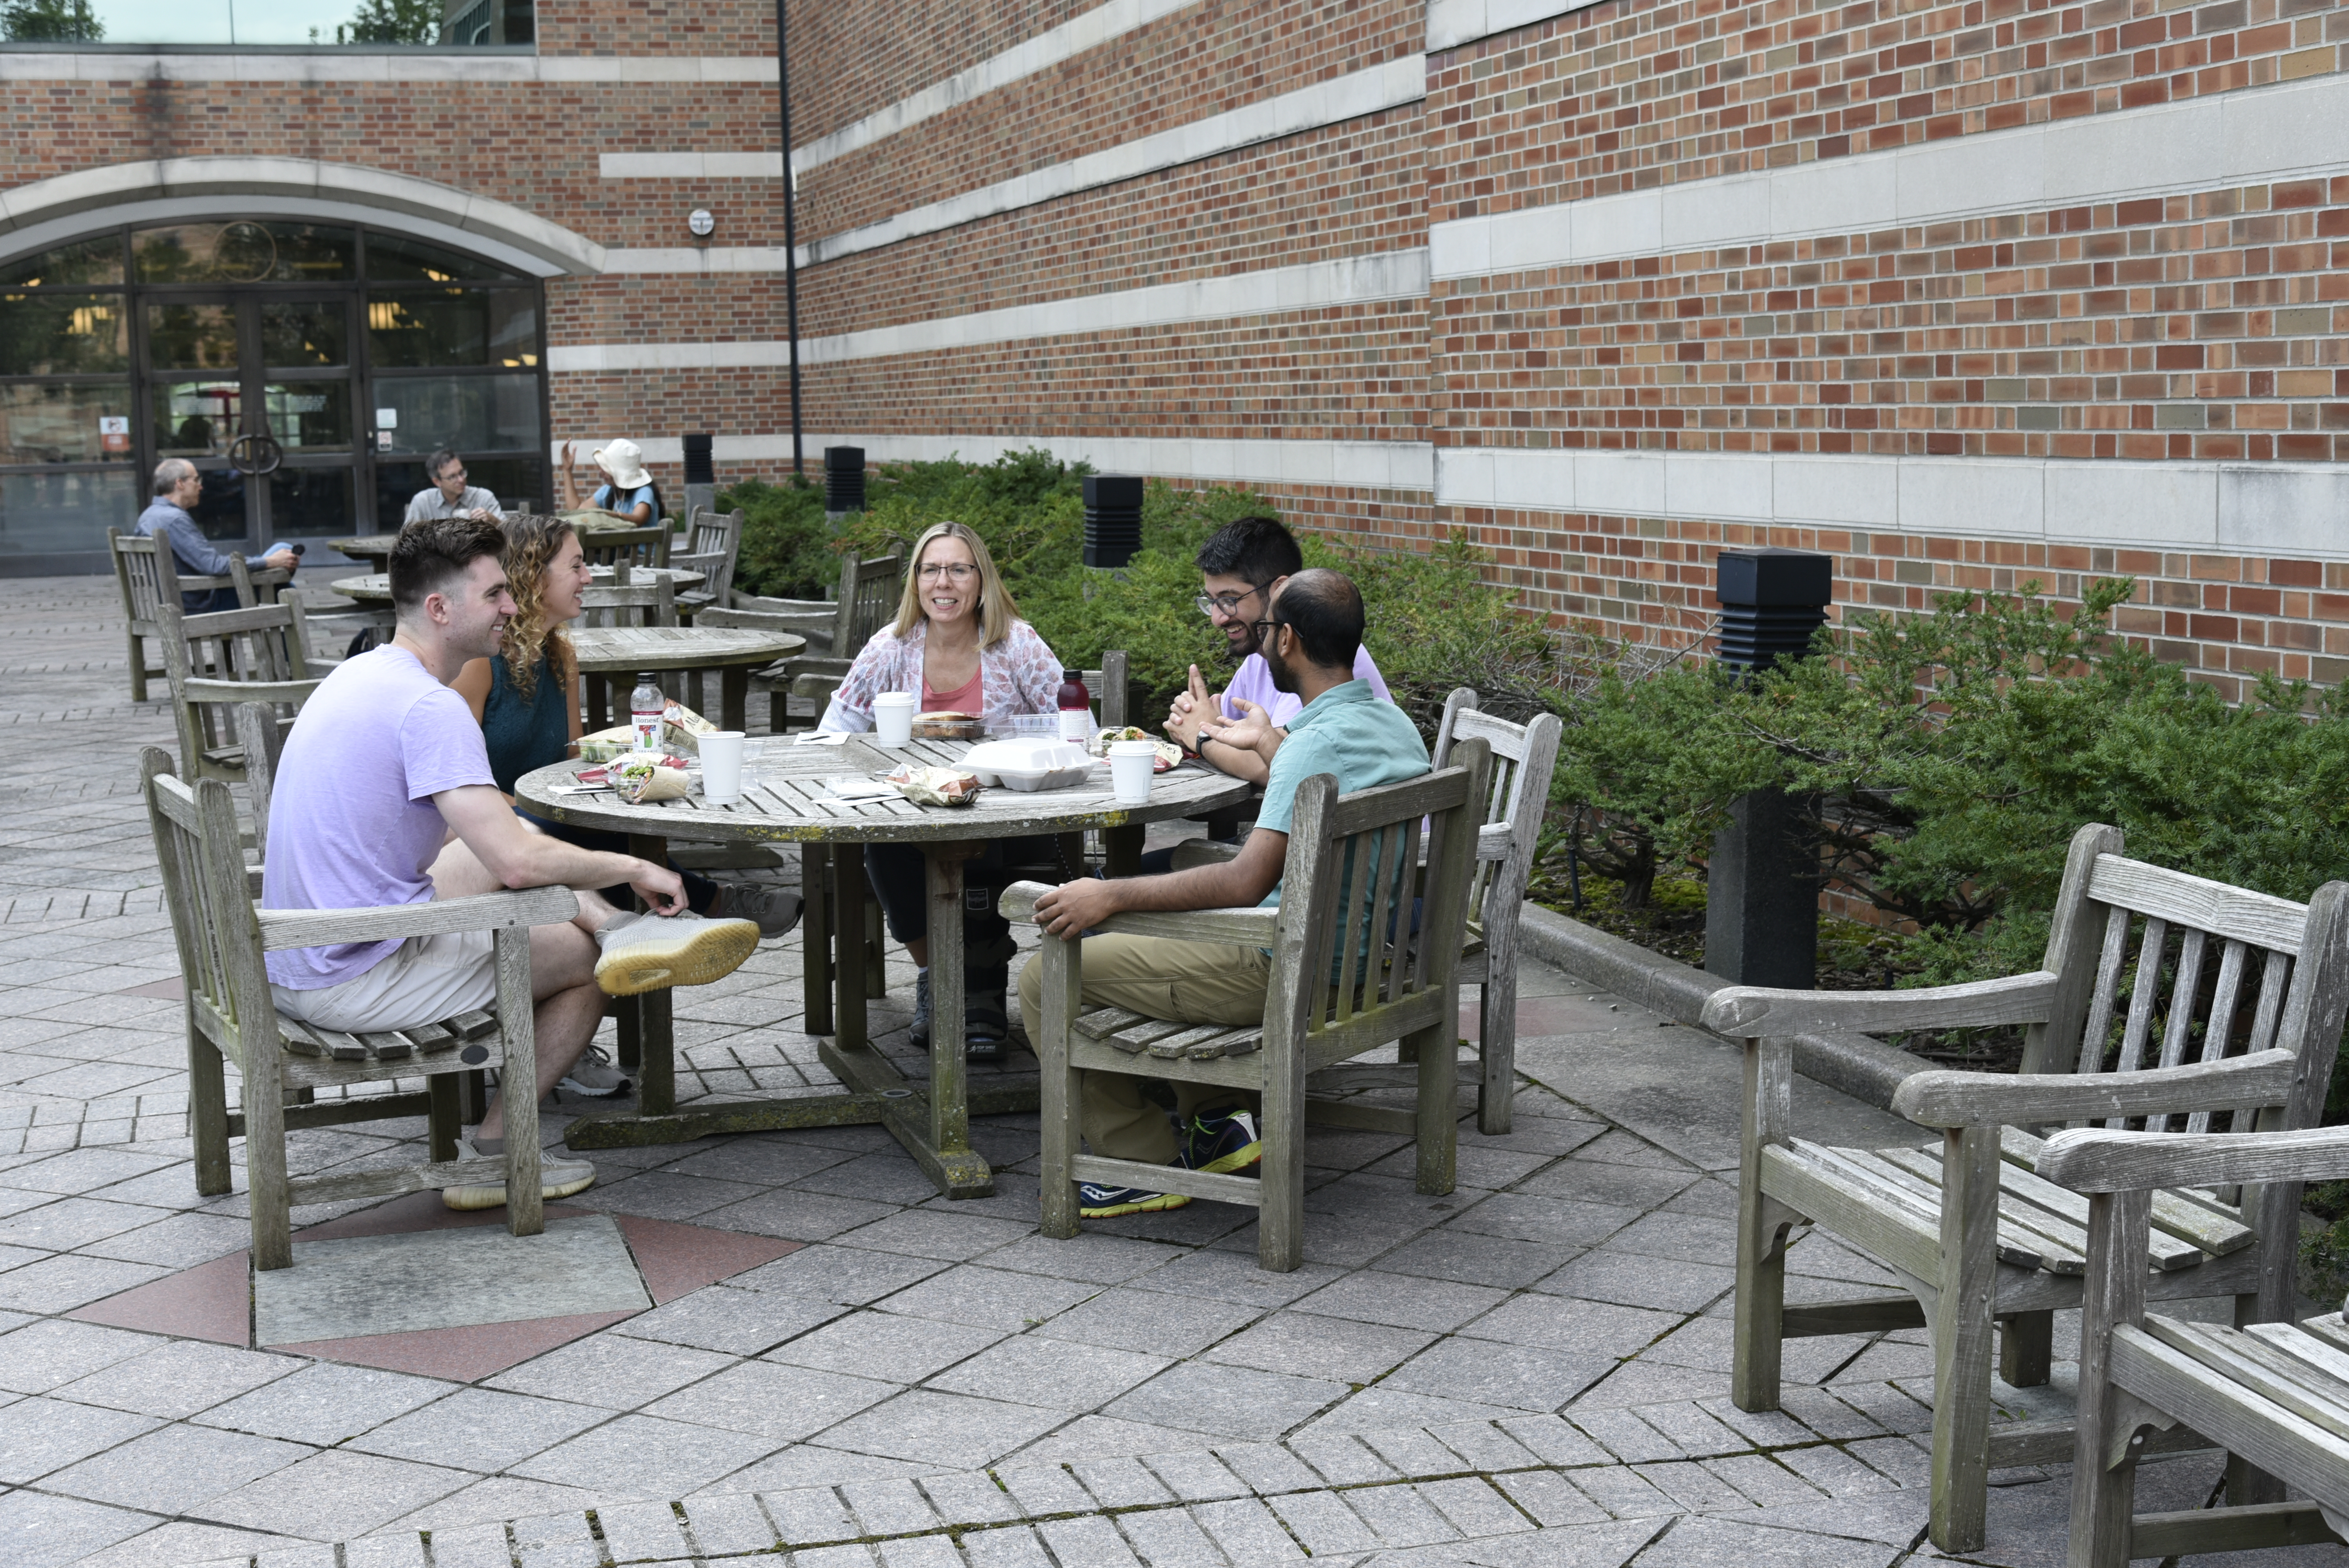 A group of researchers, including Nancy Sottos, enjoy a talkative, lively lunch in Beckman's garden.